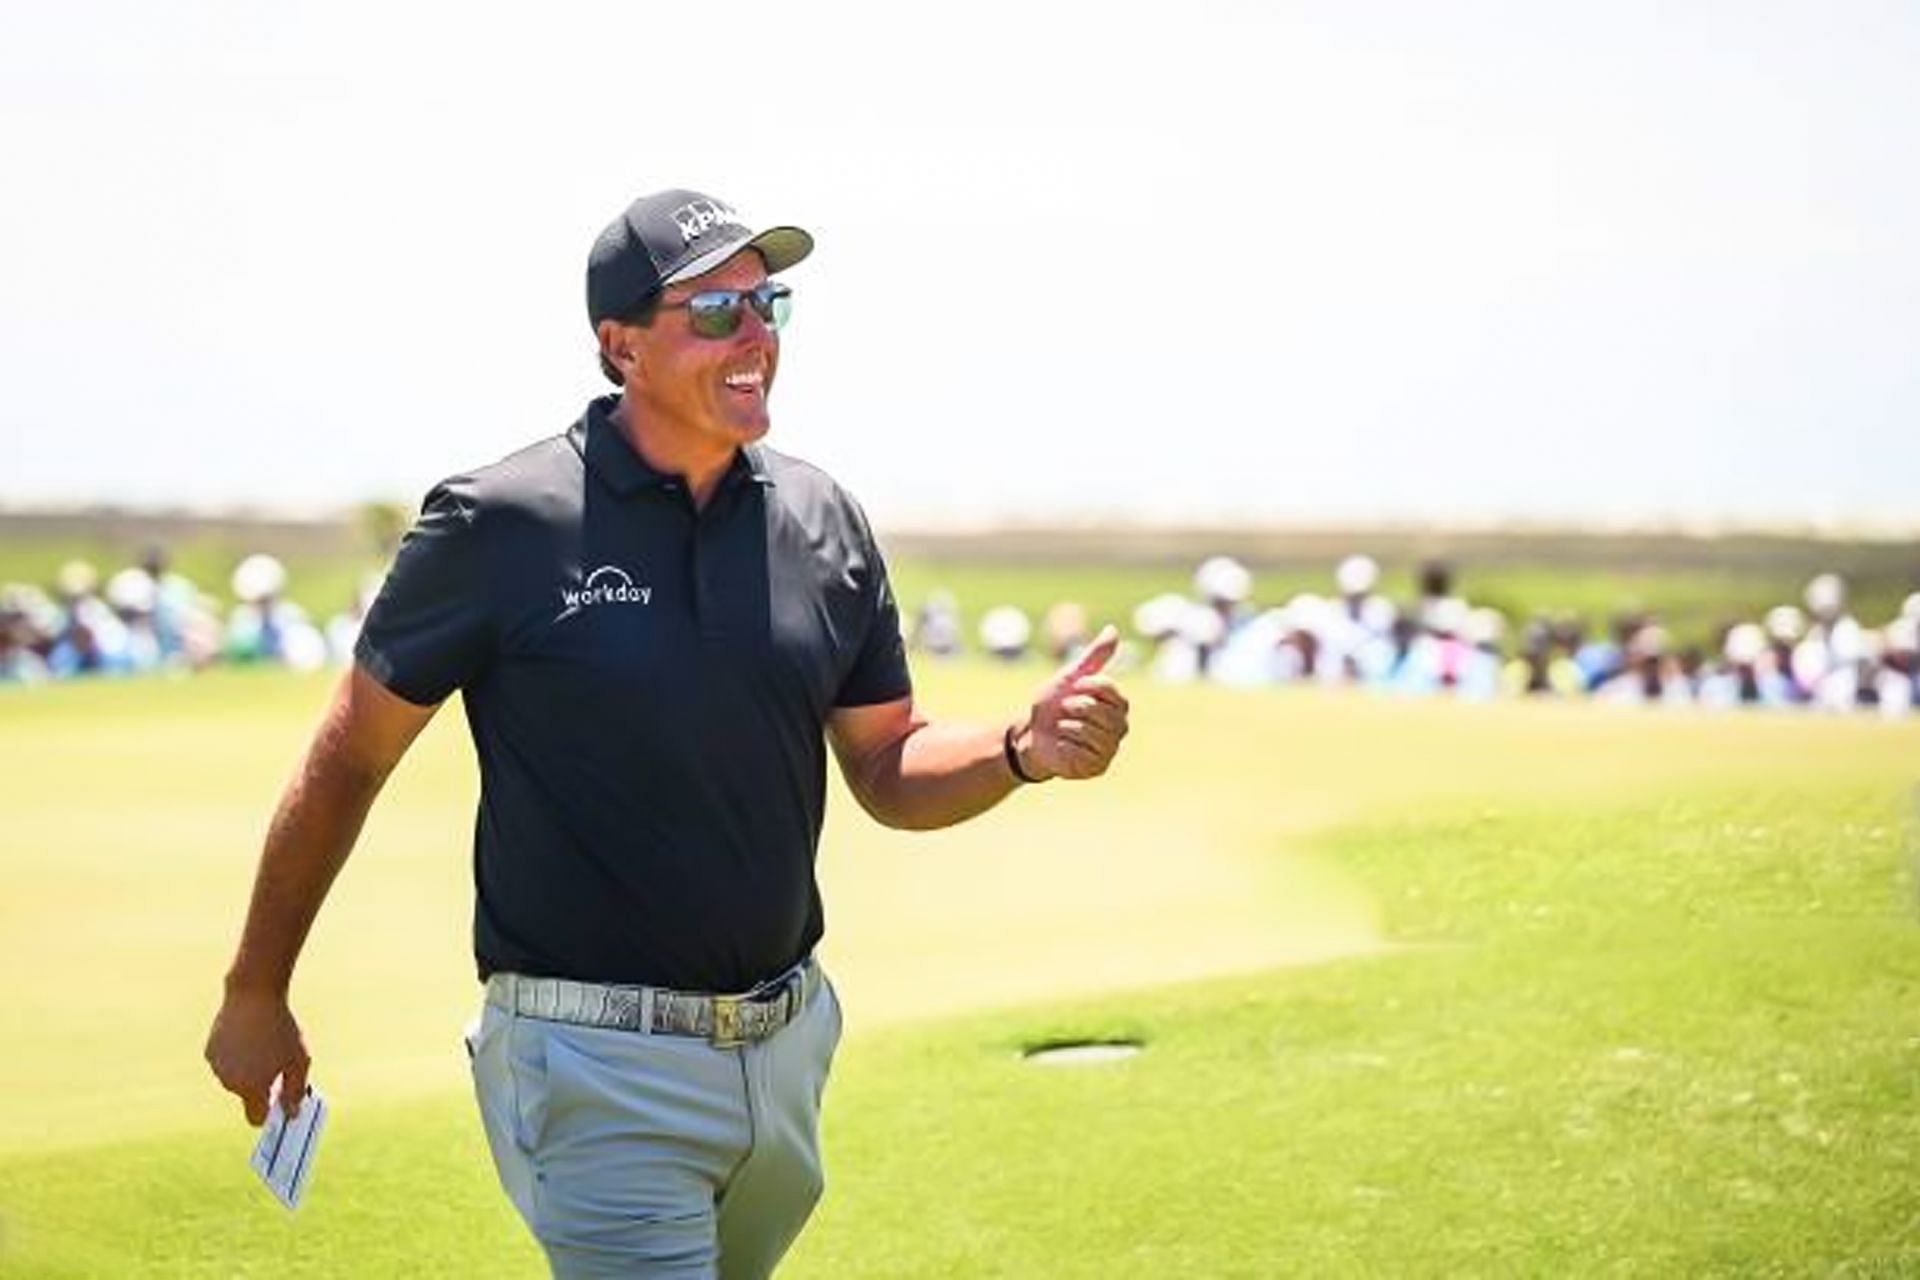 Phil Mickelson has won six major golf championships so far (Image via Getty Images)